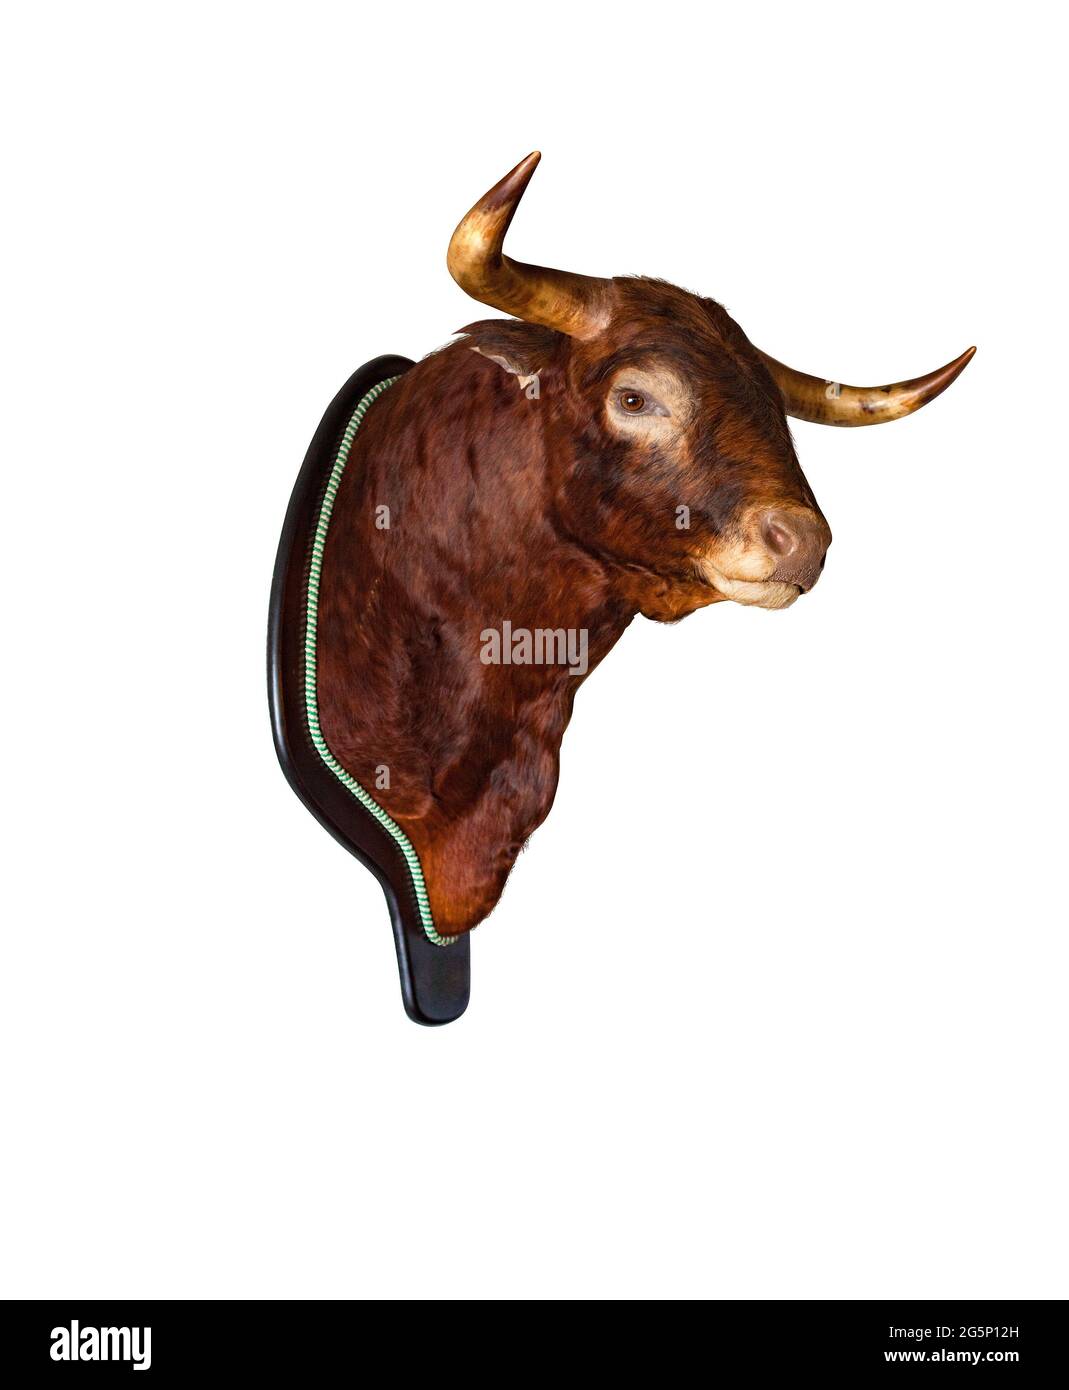 Stuffed Spanish bull's head isolated on a white background. Fighting bull Stock Photo